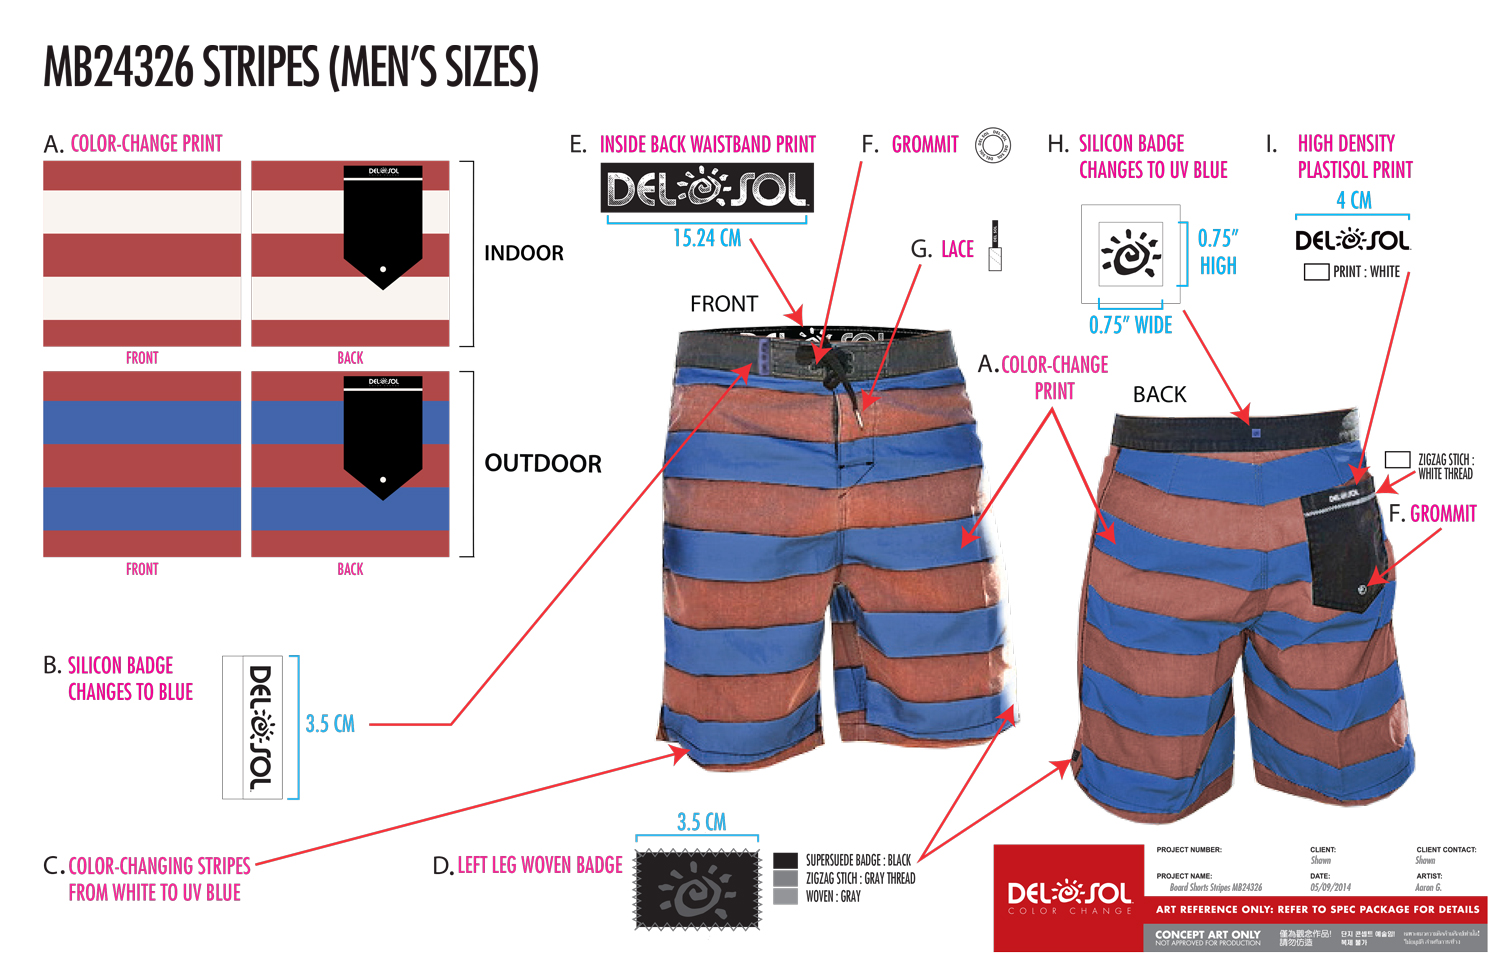 Striped shorts tech pack including color change callouts, brand elements, and product render.